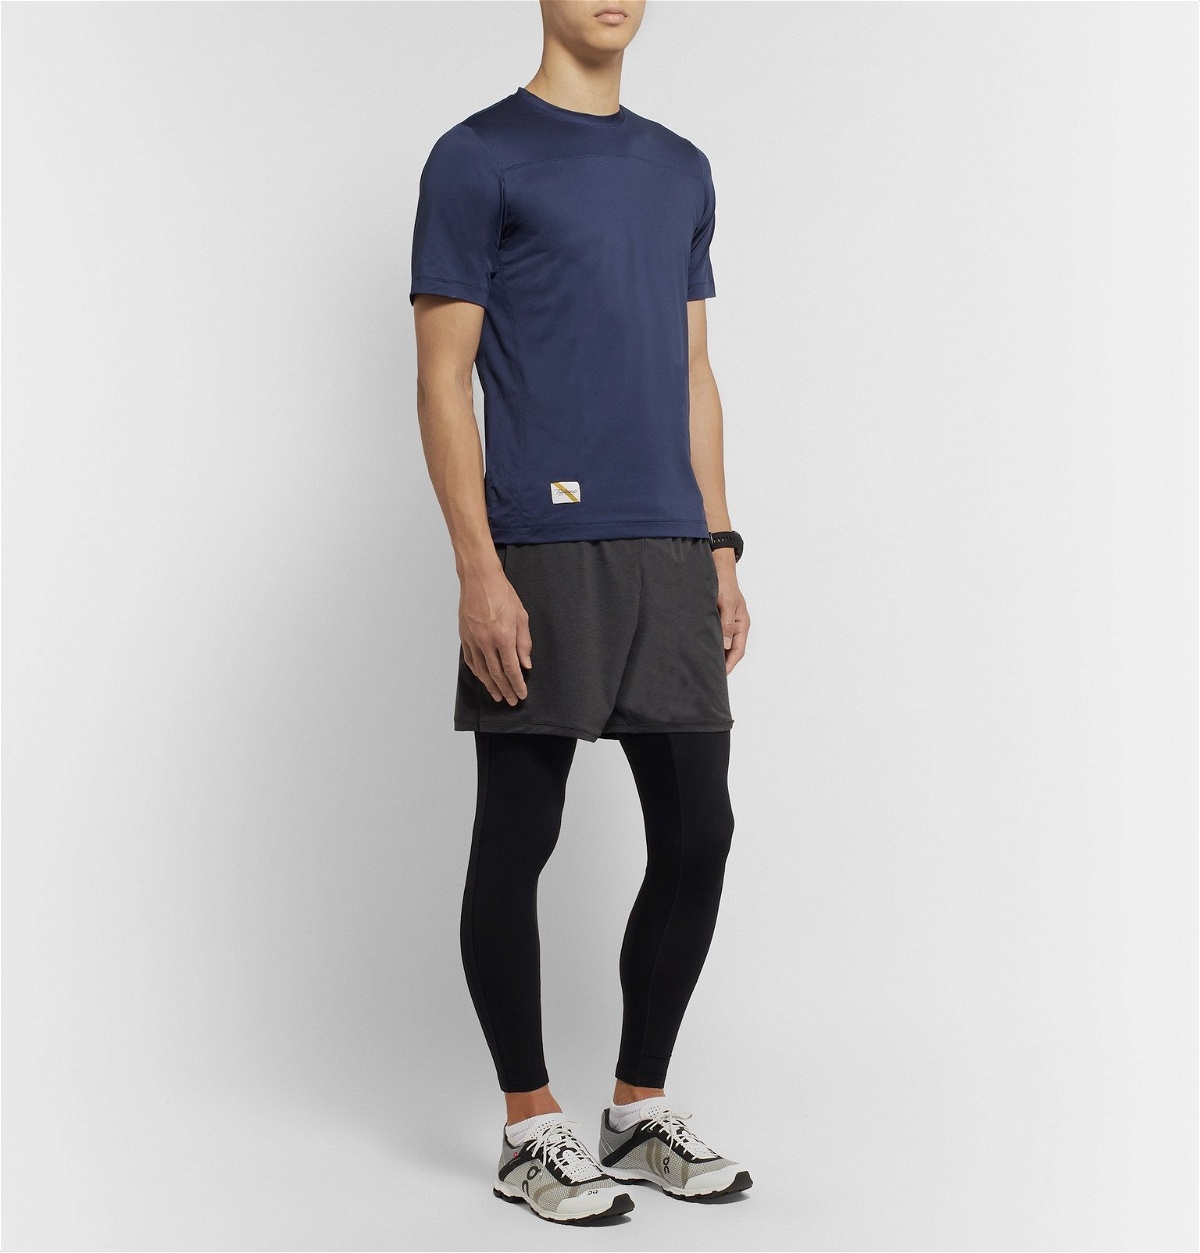 Tracksmith - Turnover Tights Lined